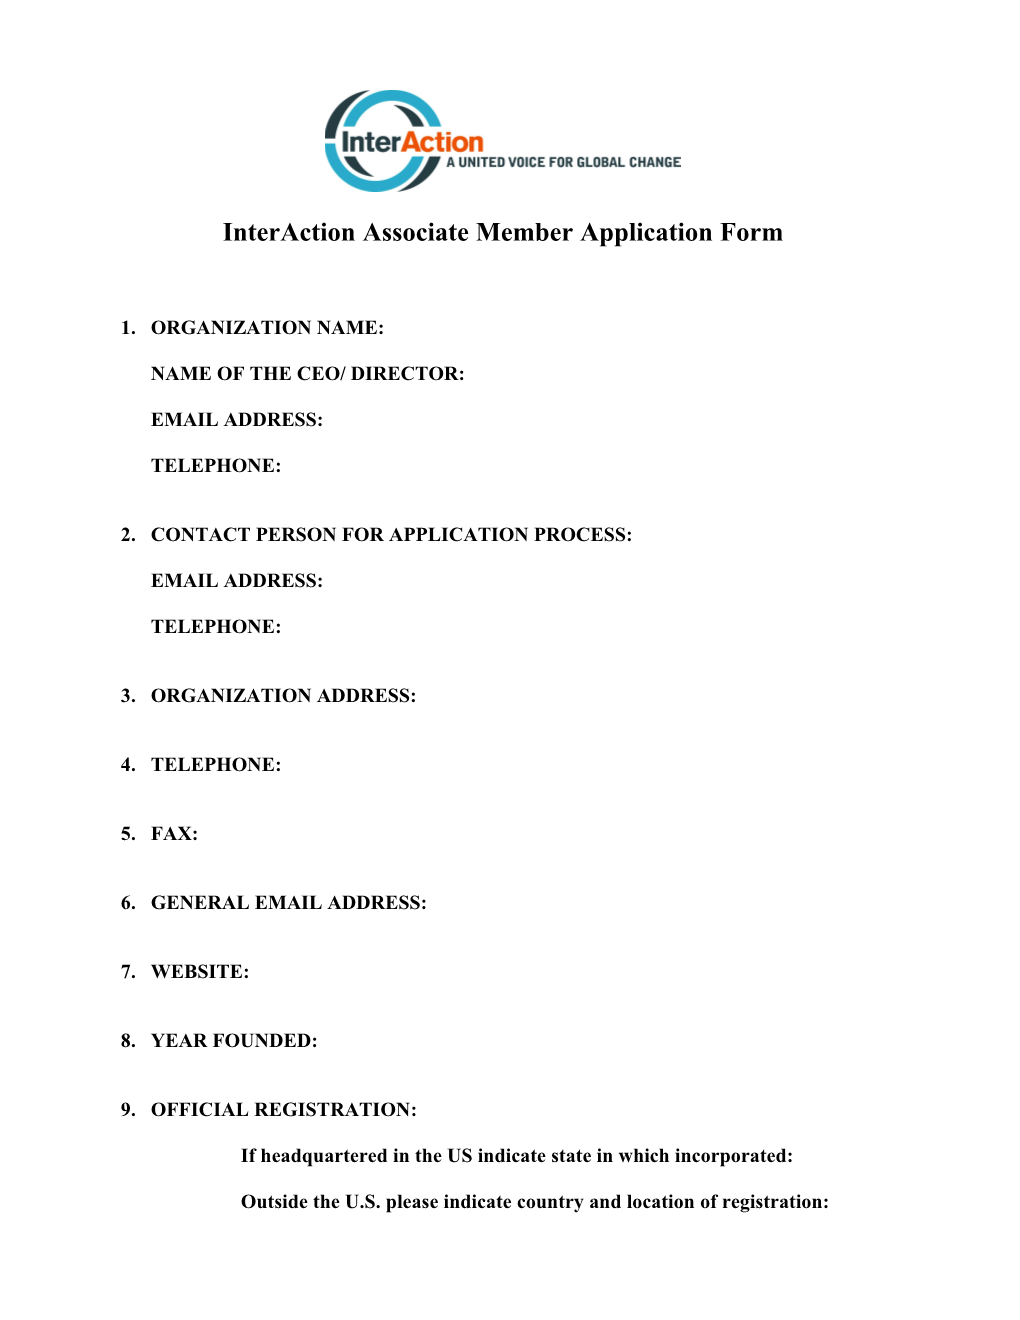 Application for Membership of Interaction